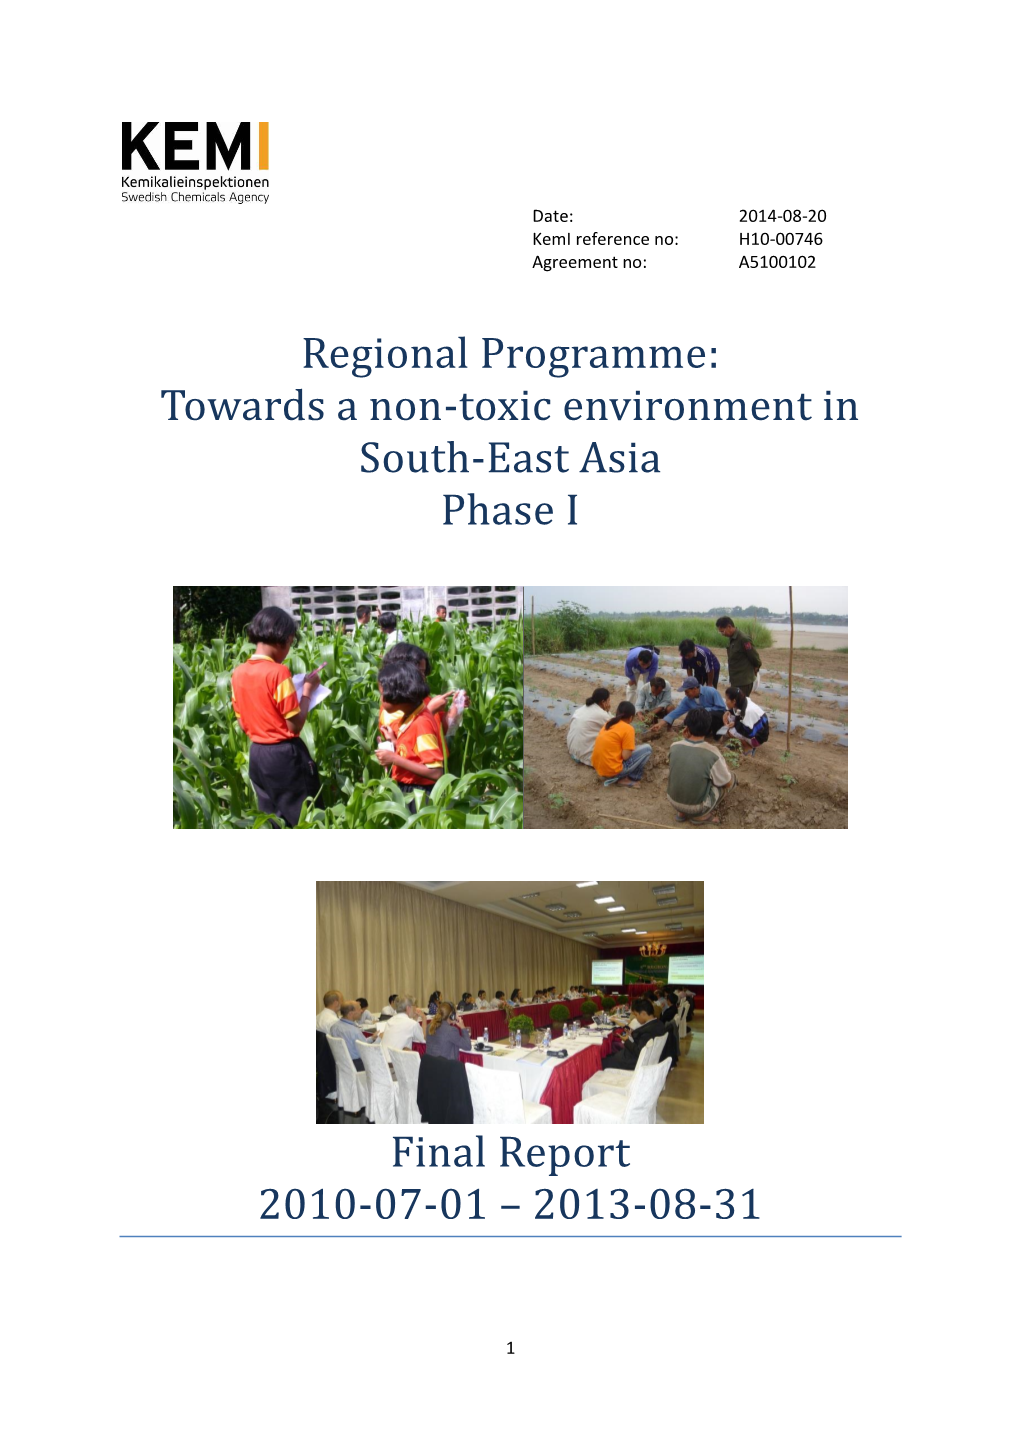 Final Report 2010-2013: Towards a Non-Toxic South-East Asia, Phase I